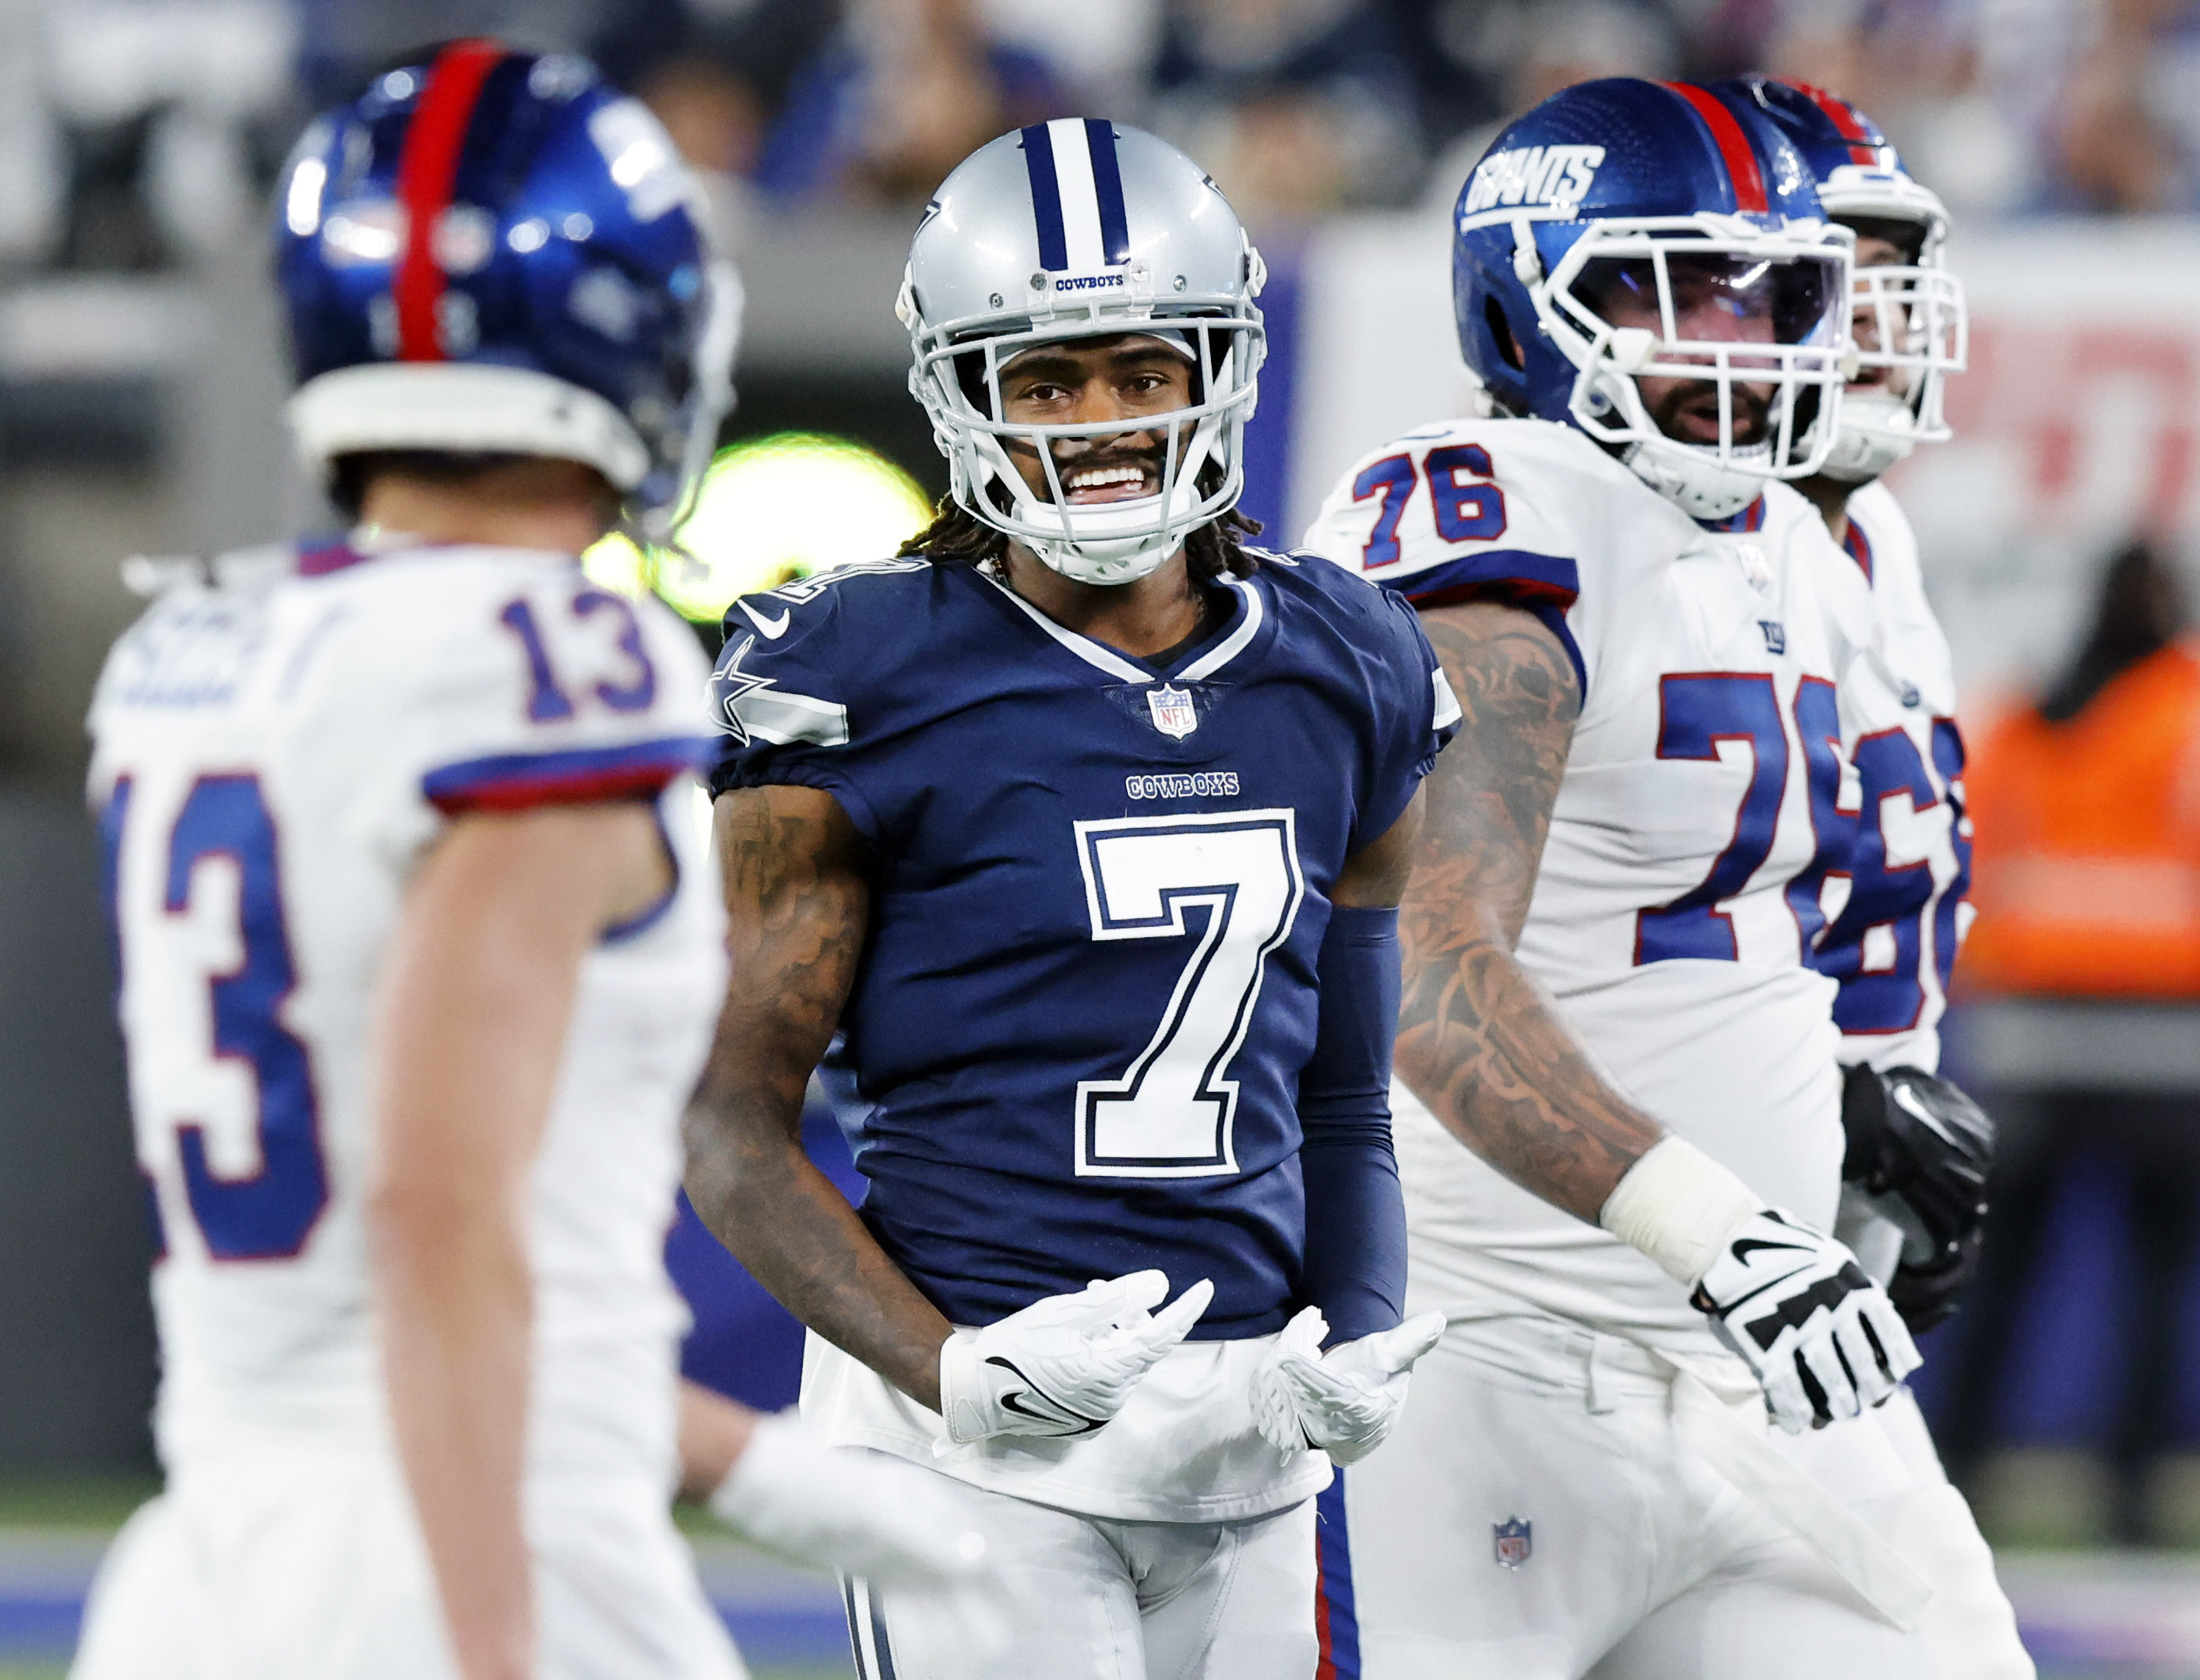 By focusing on faults, Cowboys CB Trevon Diggs has awakened the best  version of himself